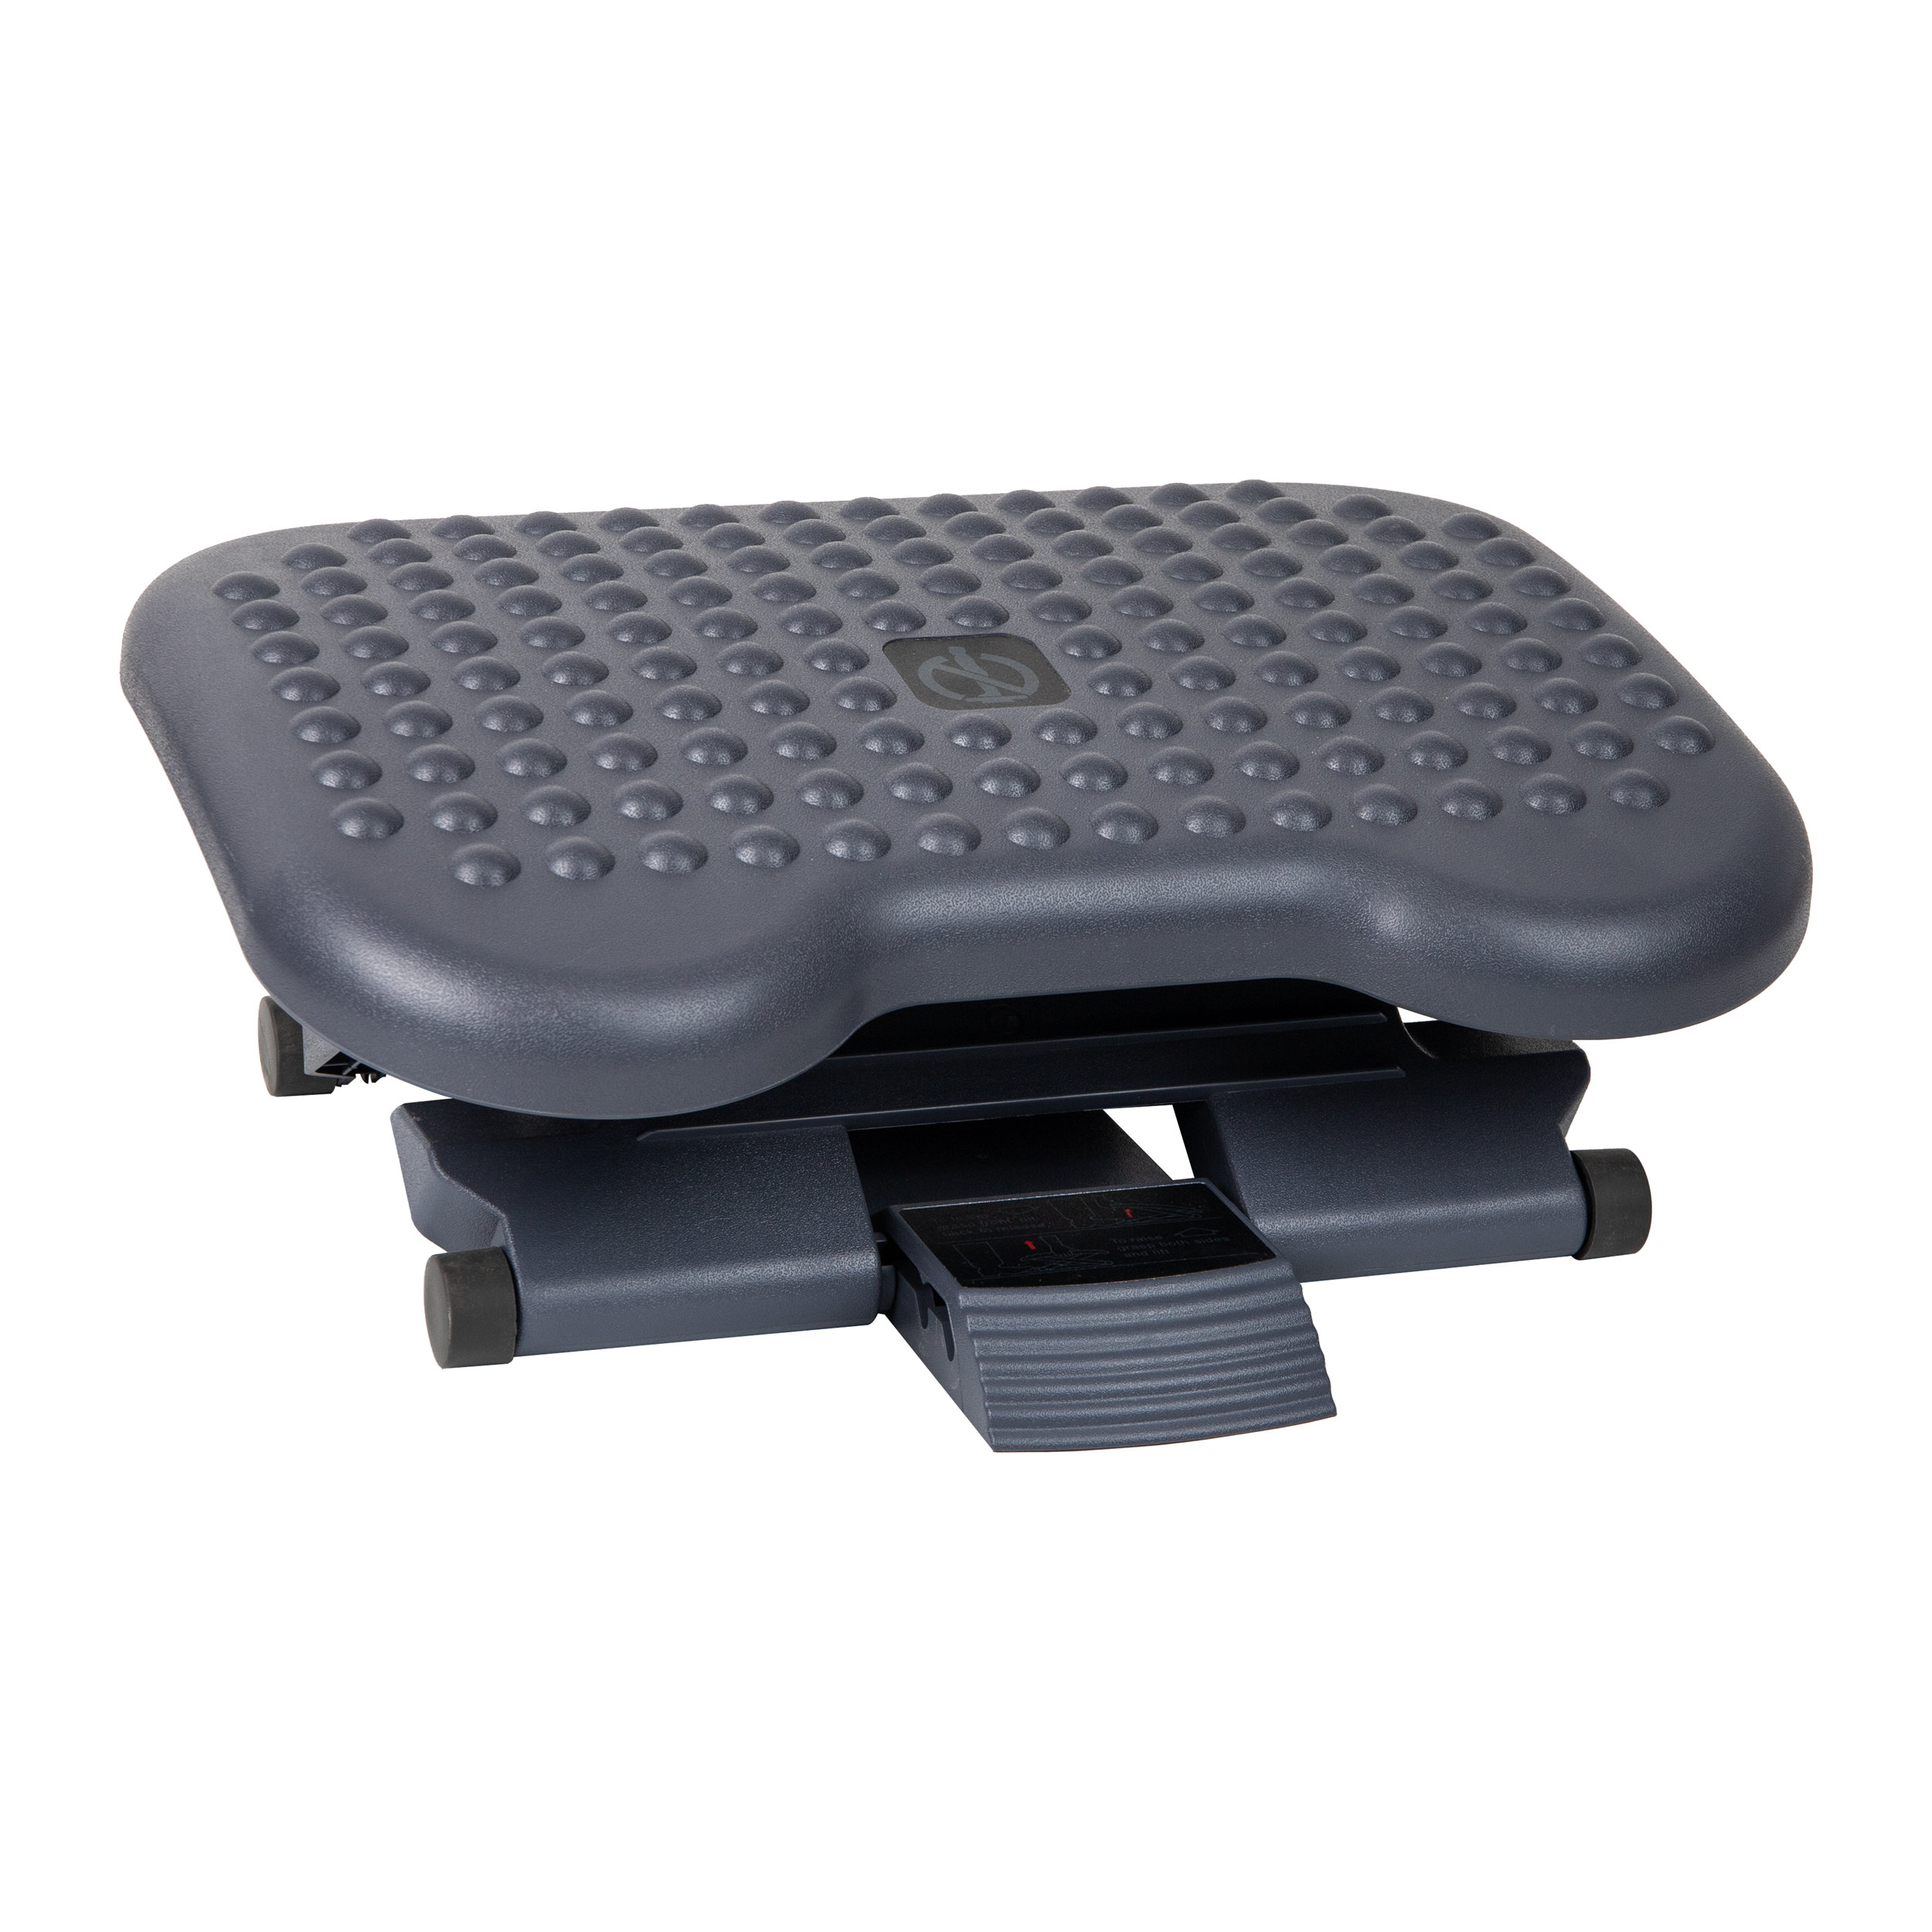 Fellowes Professional Series Back Support Black - Office Depot